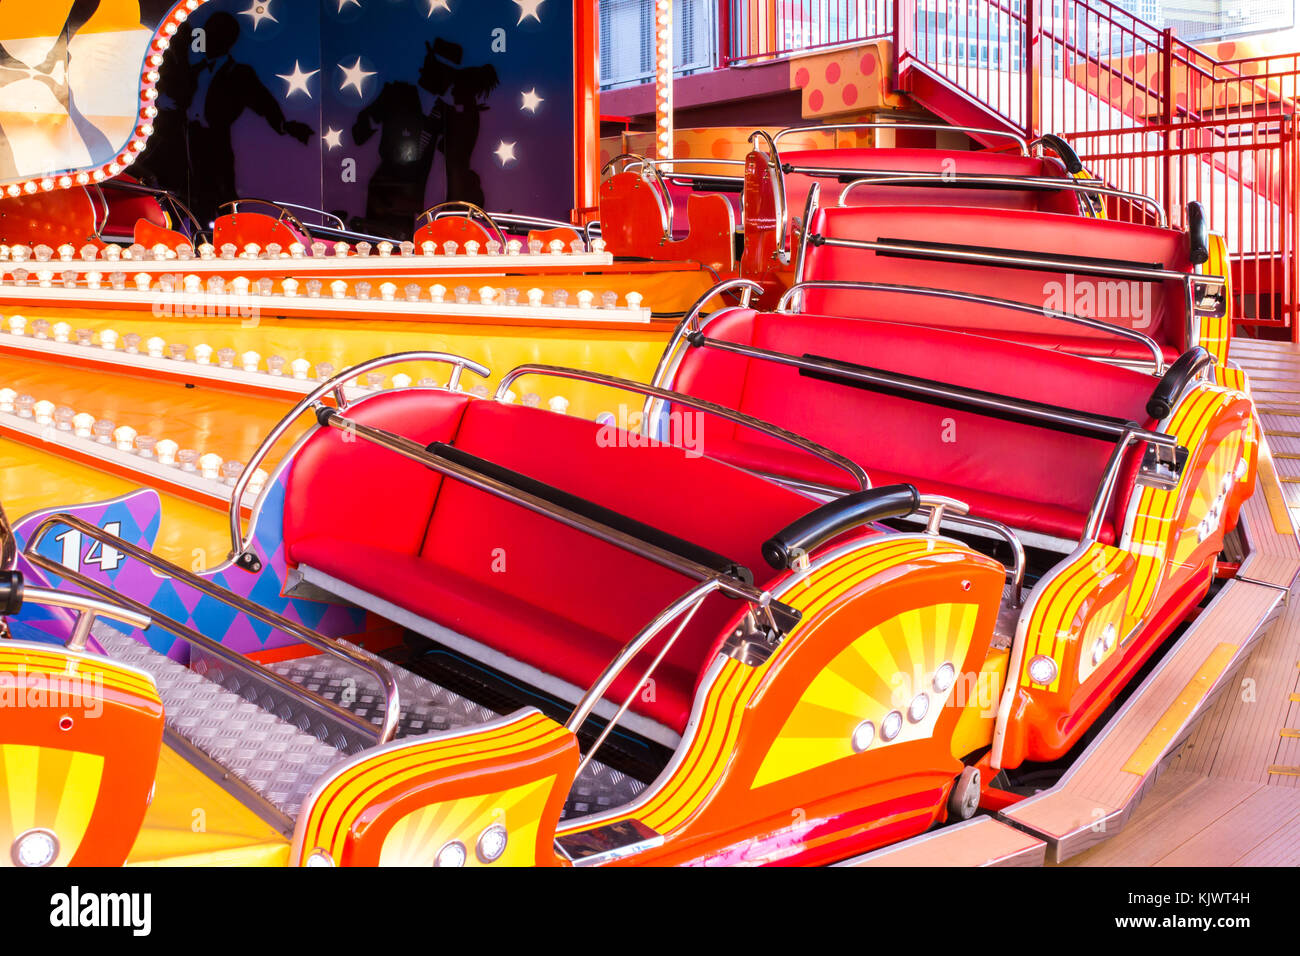 Red and yellow carnival festival carriage amusement ride Stock Photo